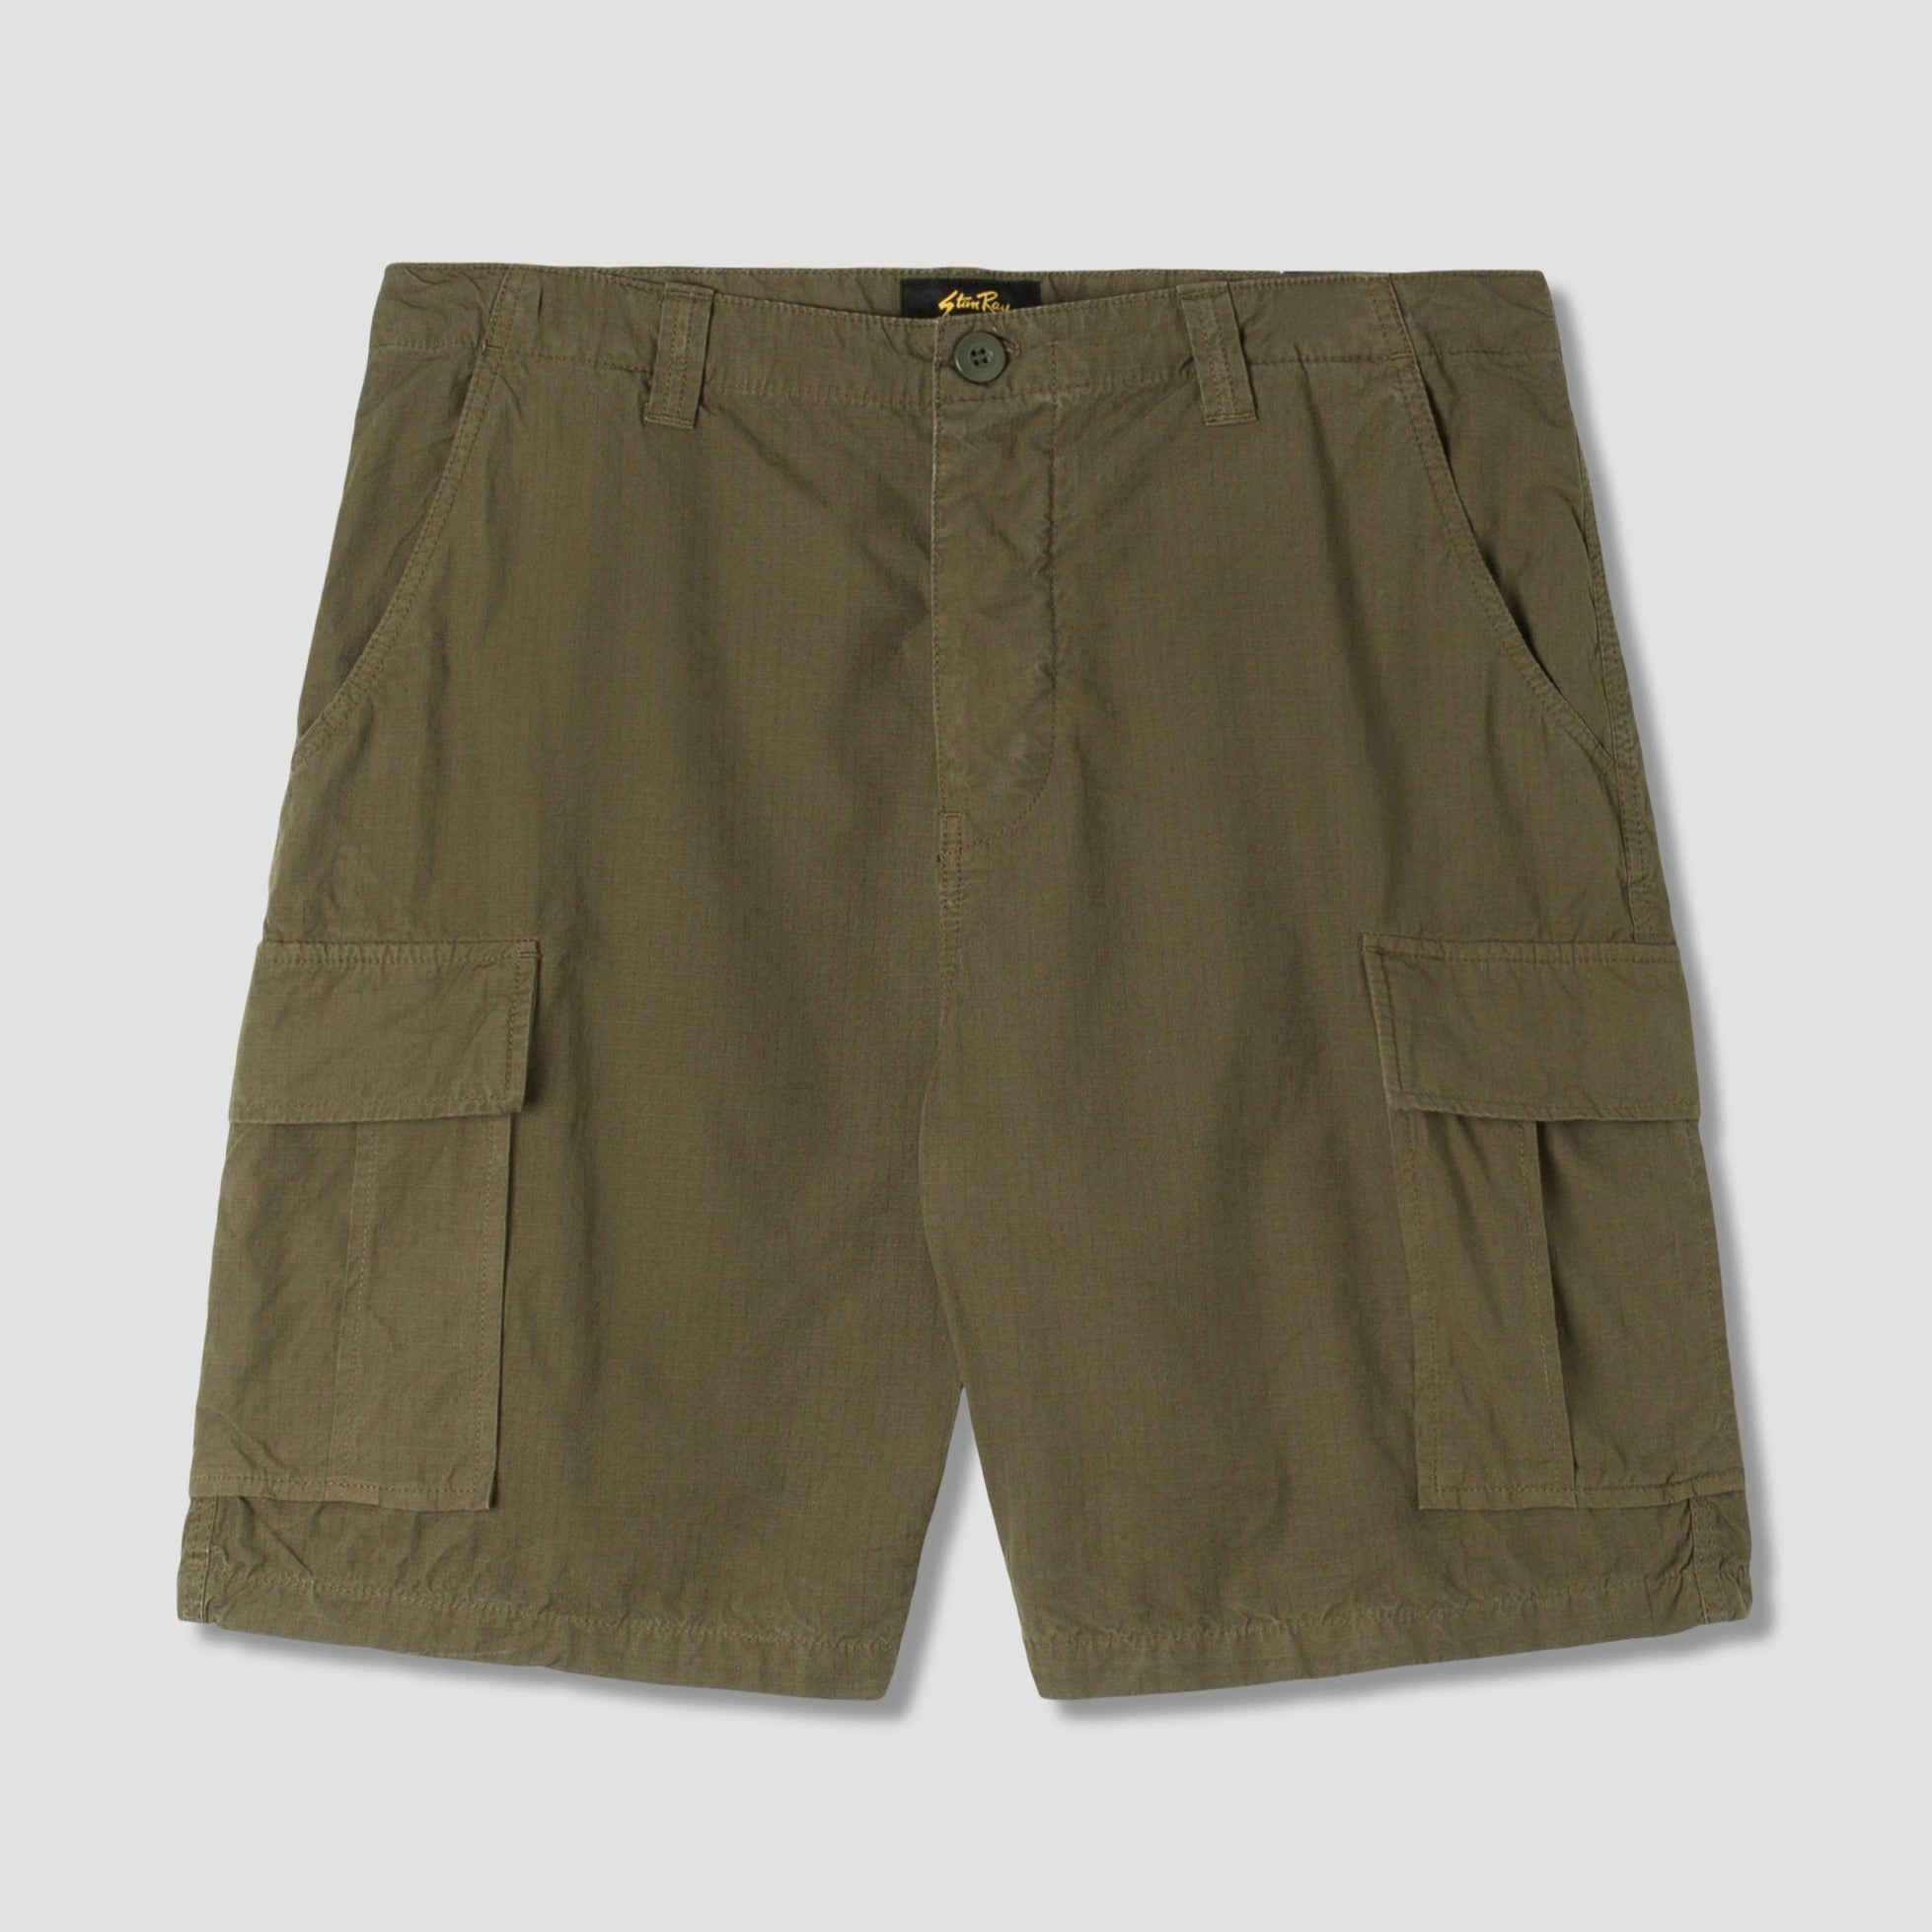 Stan Ray Cargo Short - Olive Ripstop